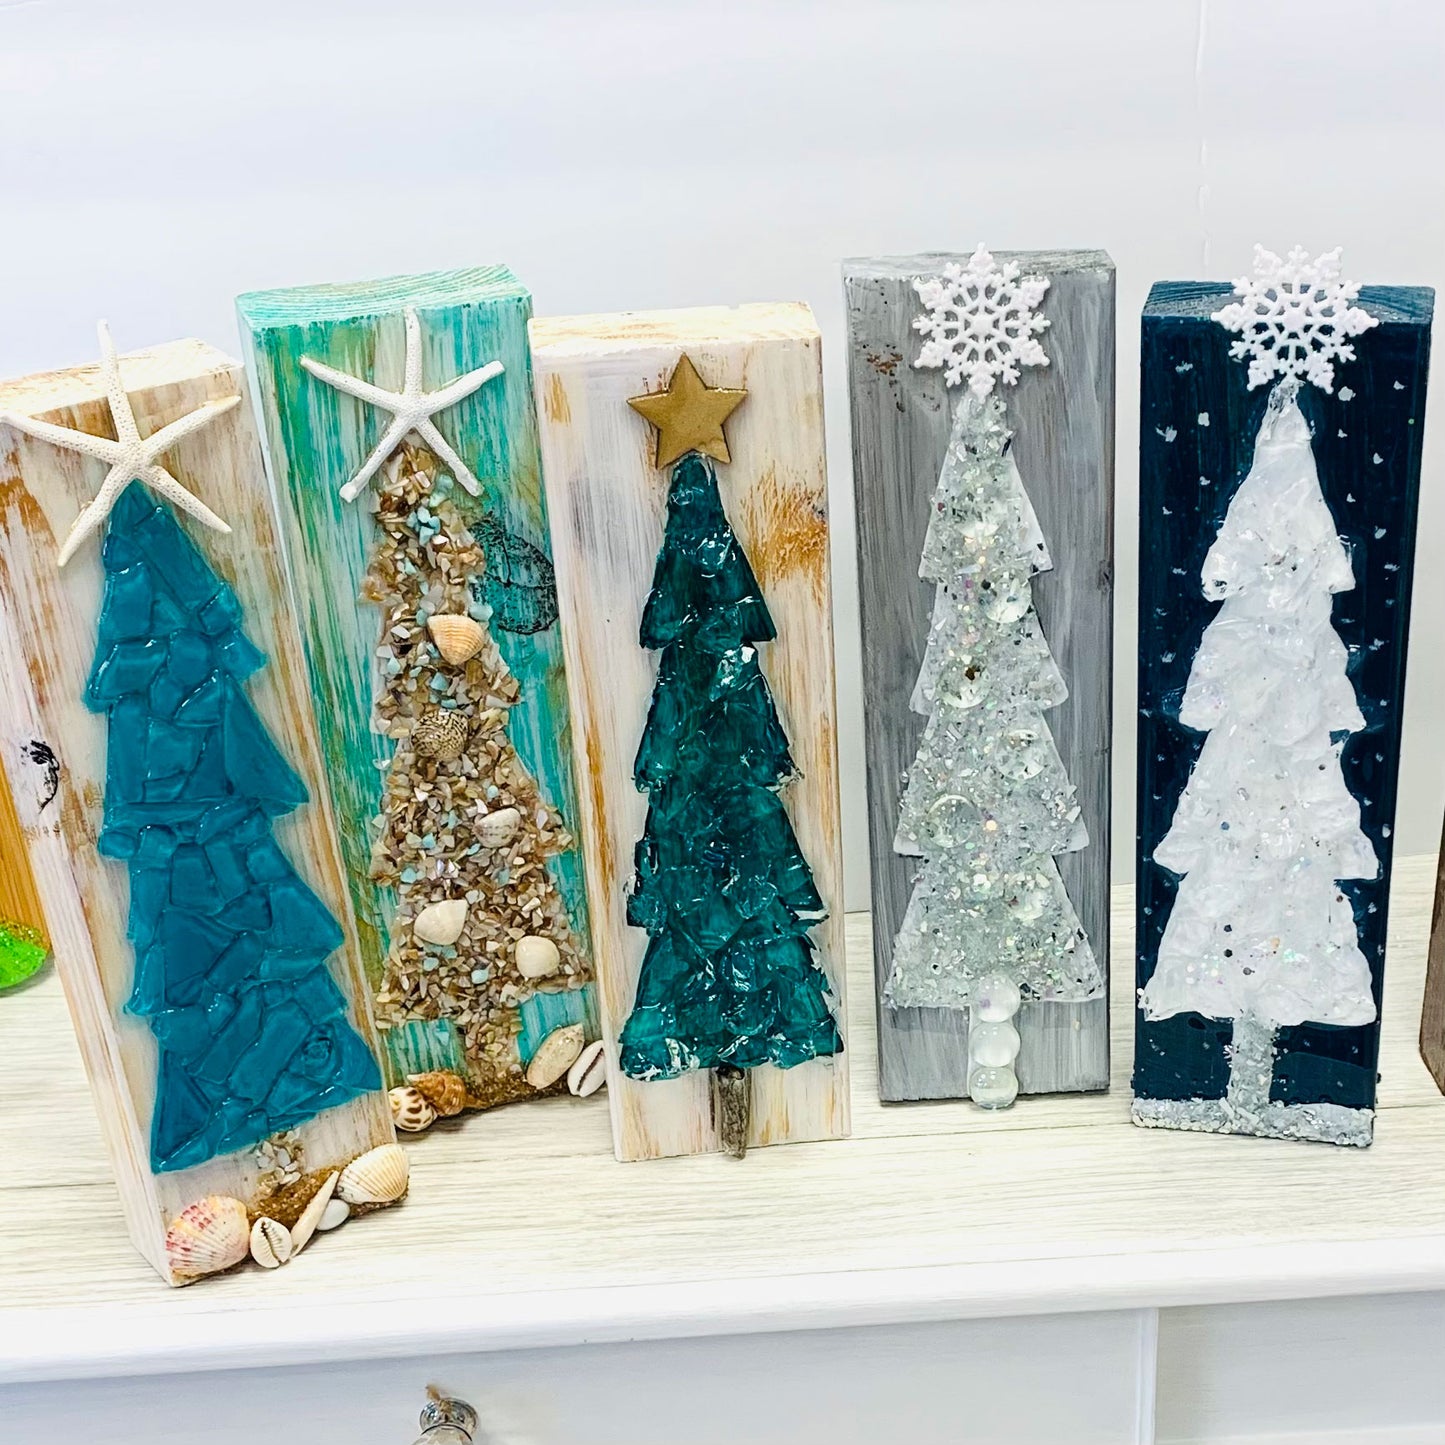 Adult Glass Tree or Cross Resin Class Sun. 10/29 at 2:00 pm